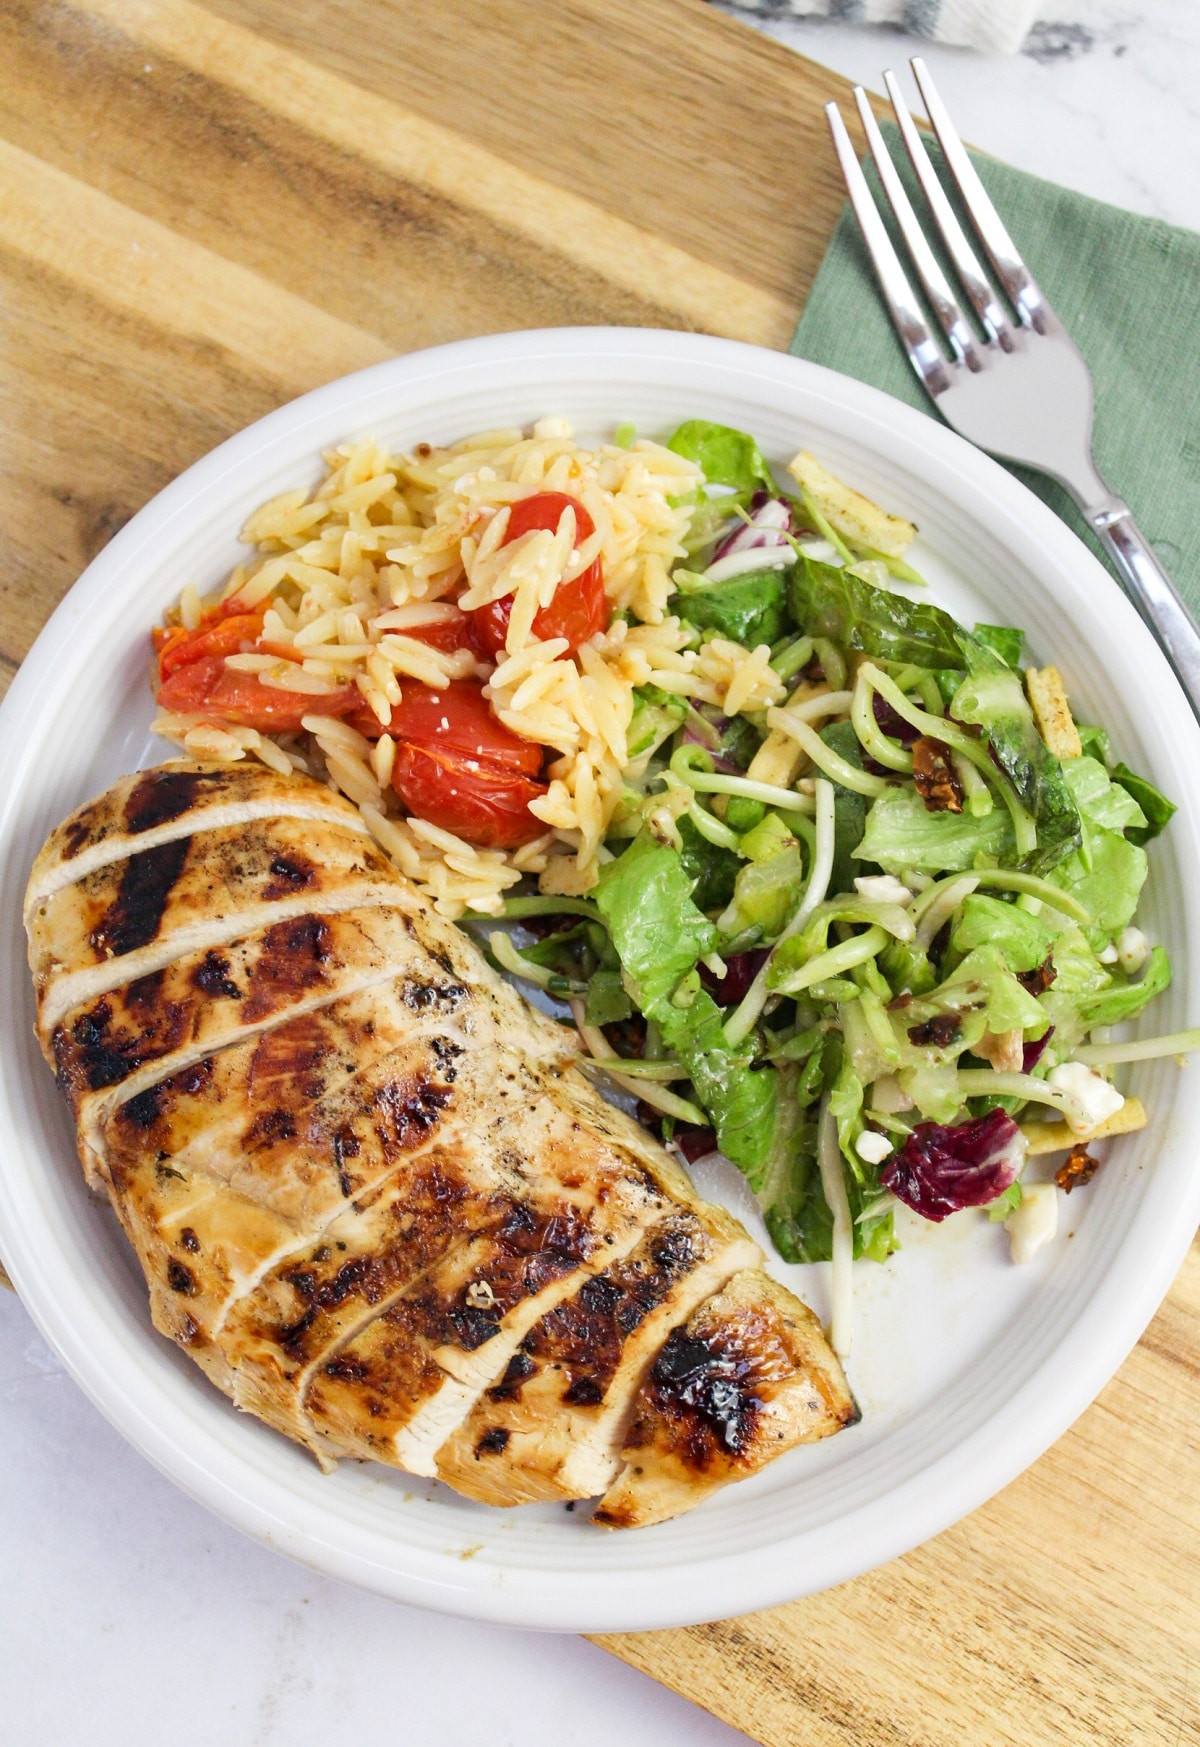 sliced grilled greek chicken on a plate with salad and rice.